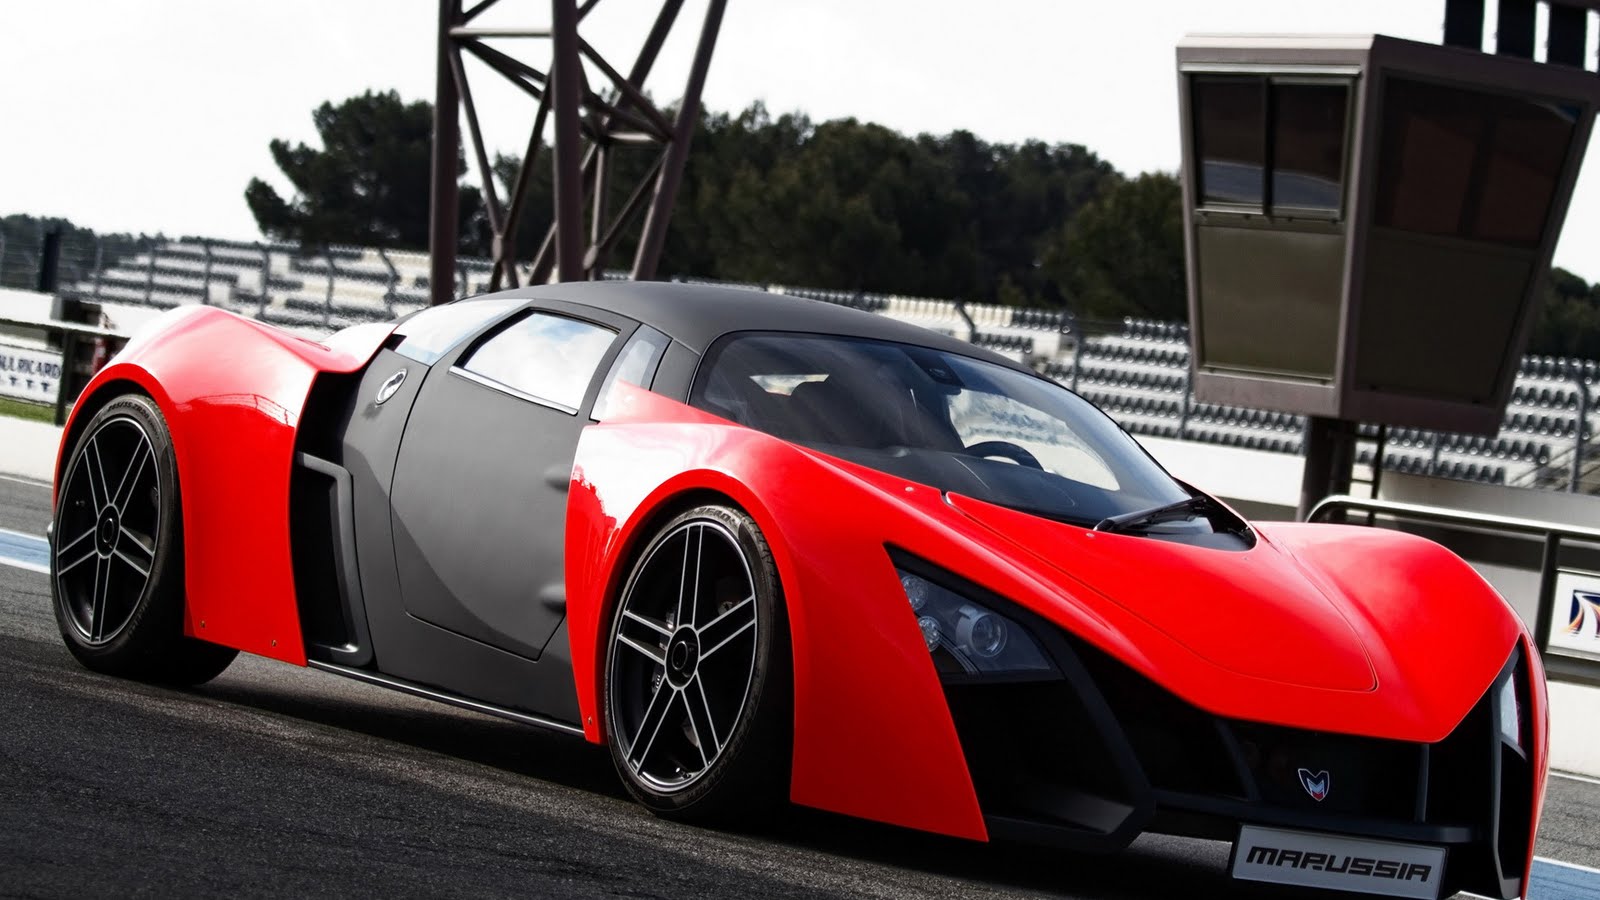 Marussia Red Luxury Supercar HD Wallpaper The